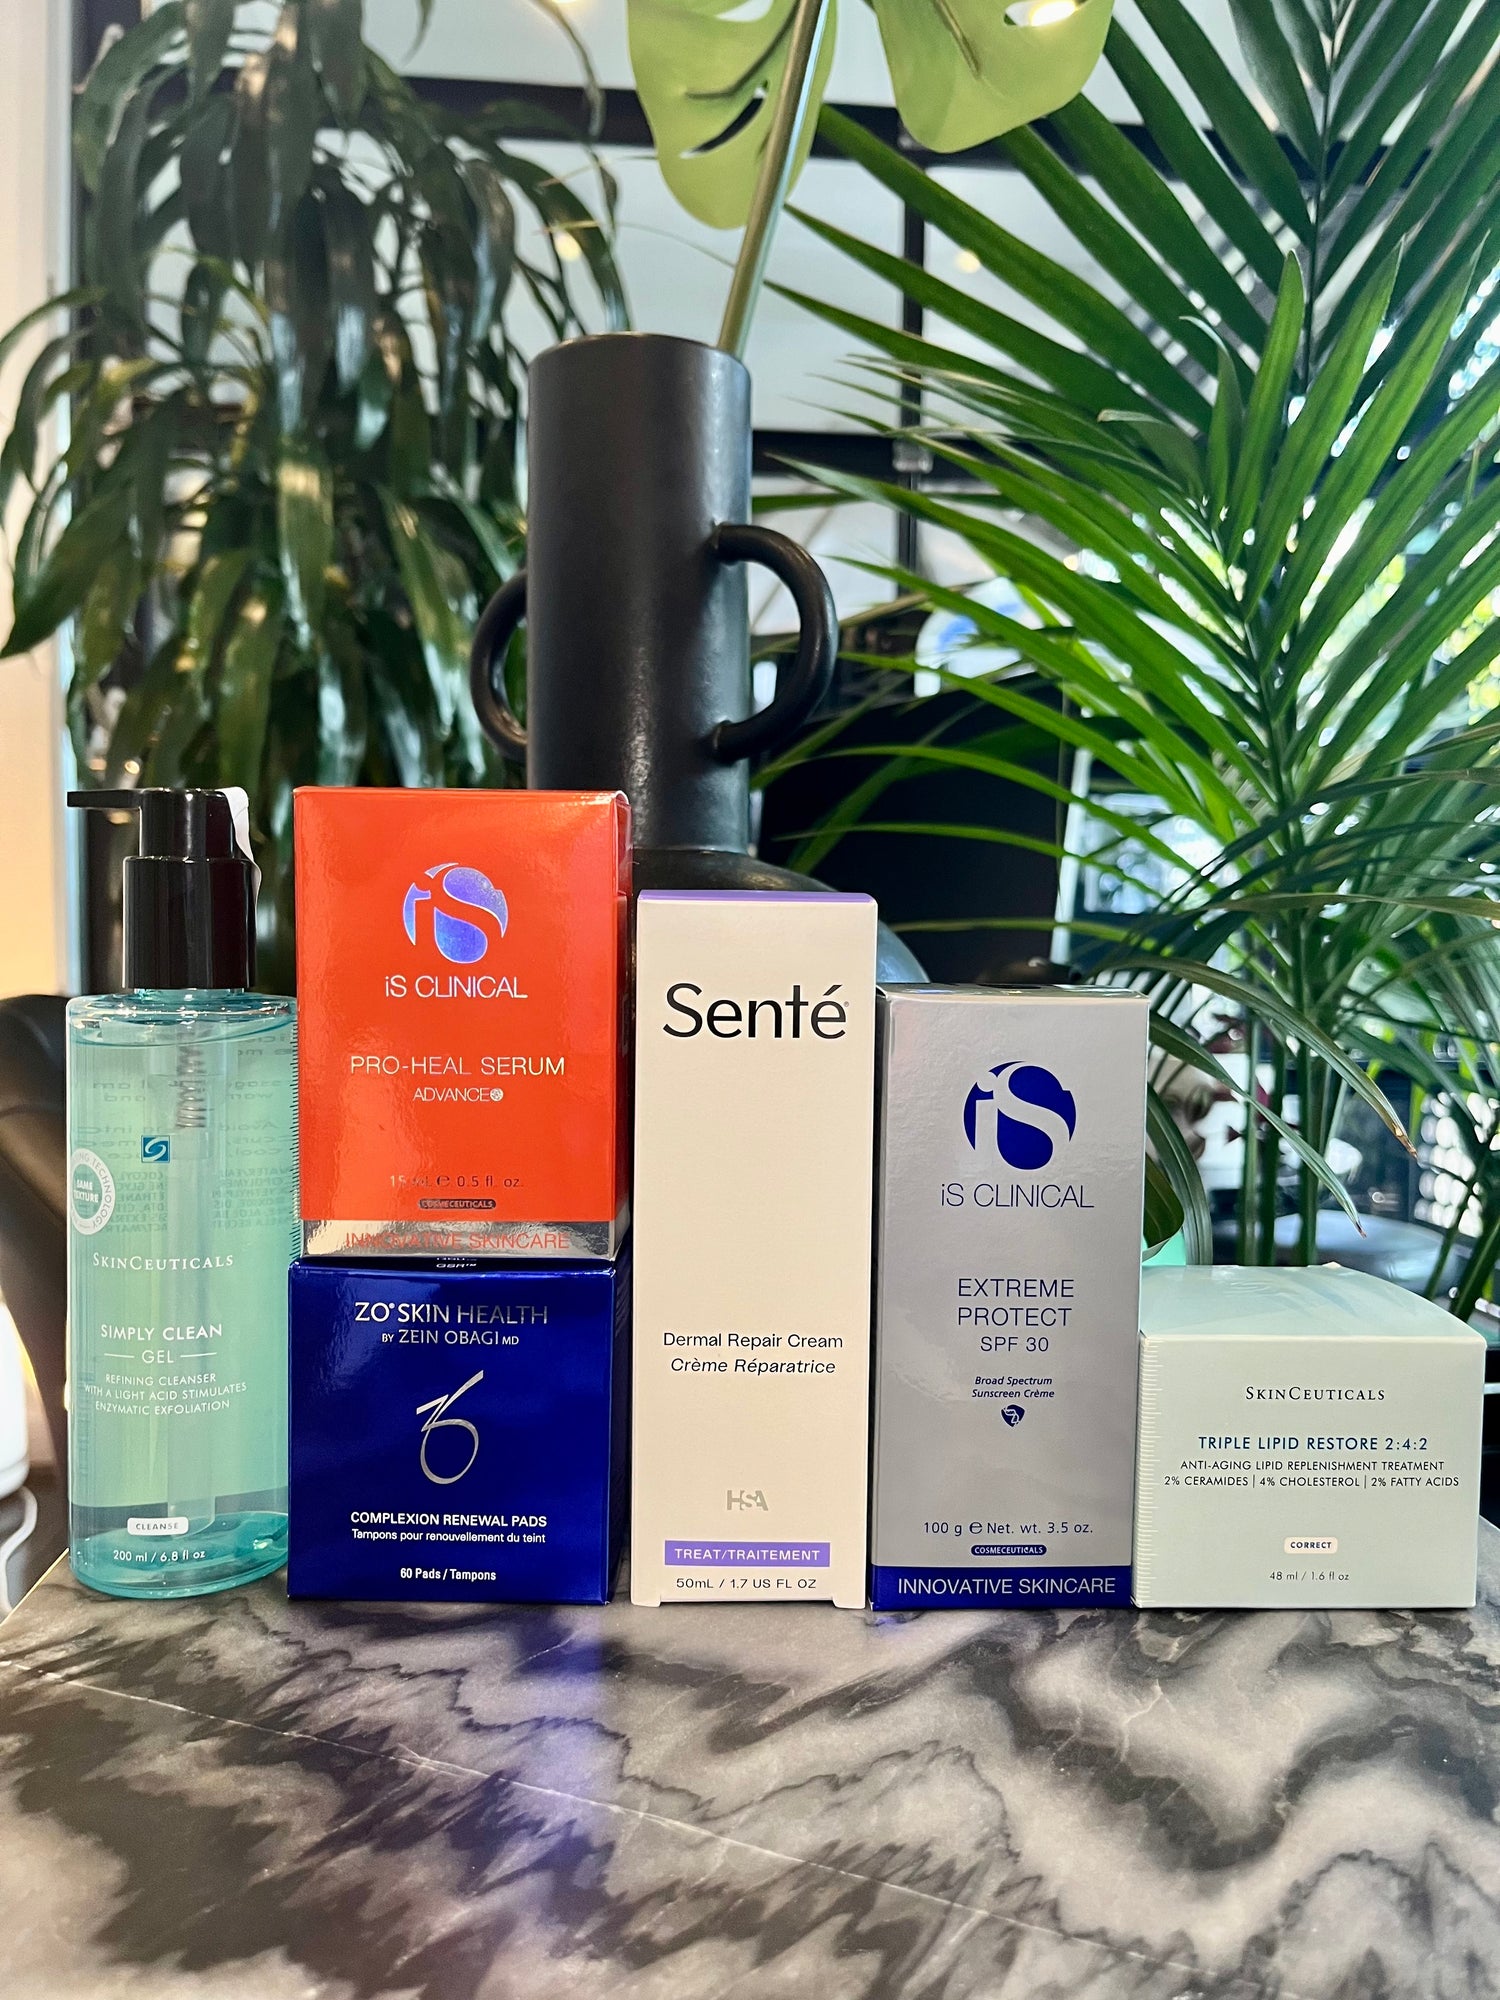 Simply Clean, Skin Ceuticals (AM/PM) Complexion Renewal Pads (PM) Pro-Heal Serum, iS Clinical (AM/PM as tolerated) Dermal Repair Cream, Senté (AM/PM) Extreme Protect, iS Clinical (AM &amp; every 2 hours) Triple Lipid Restore, Skin Ceuticals, (PM)